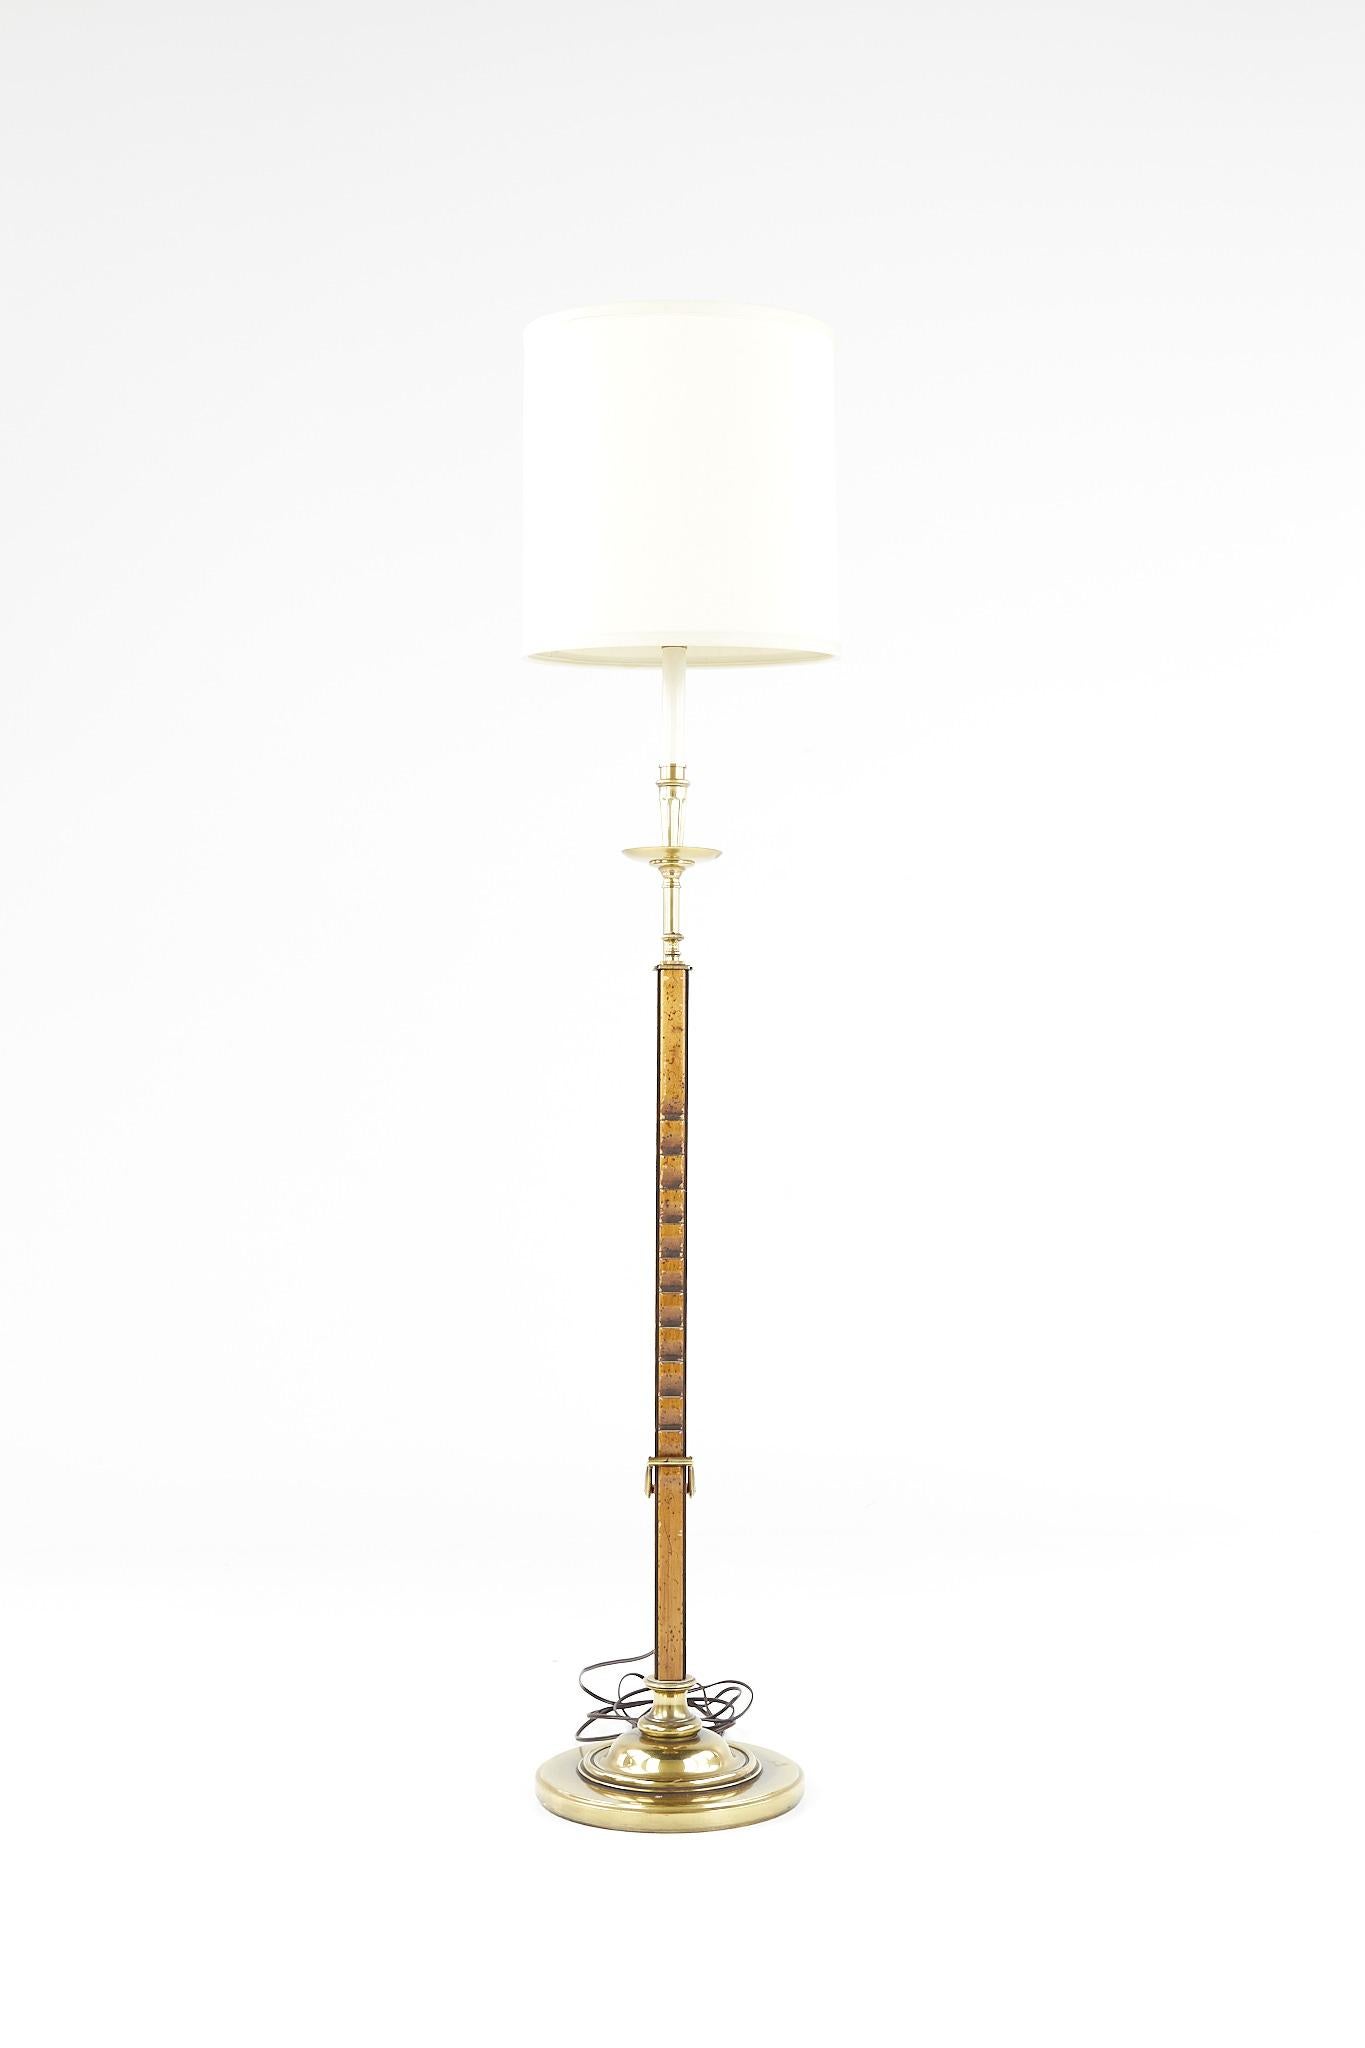 Frances Elkins style mid century brass and burlwood adjustable floor lamp

This lamp measures: 10 wide x 10 deep x 53 inches high, with a maximum height of 66 inches

We take our photos in a controlled lighting studio to show as much detail as